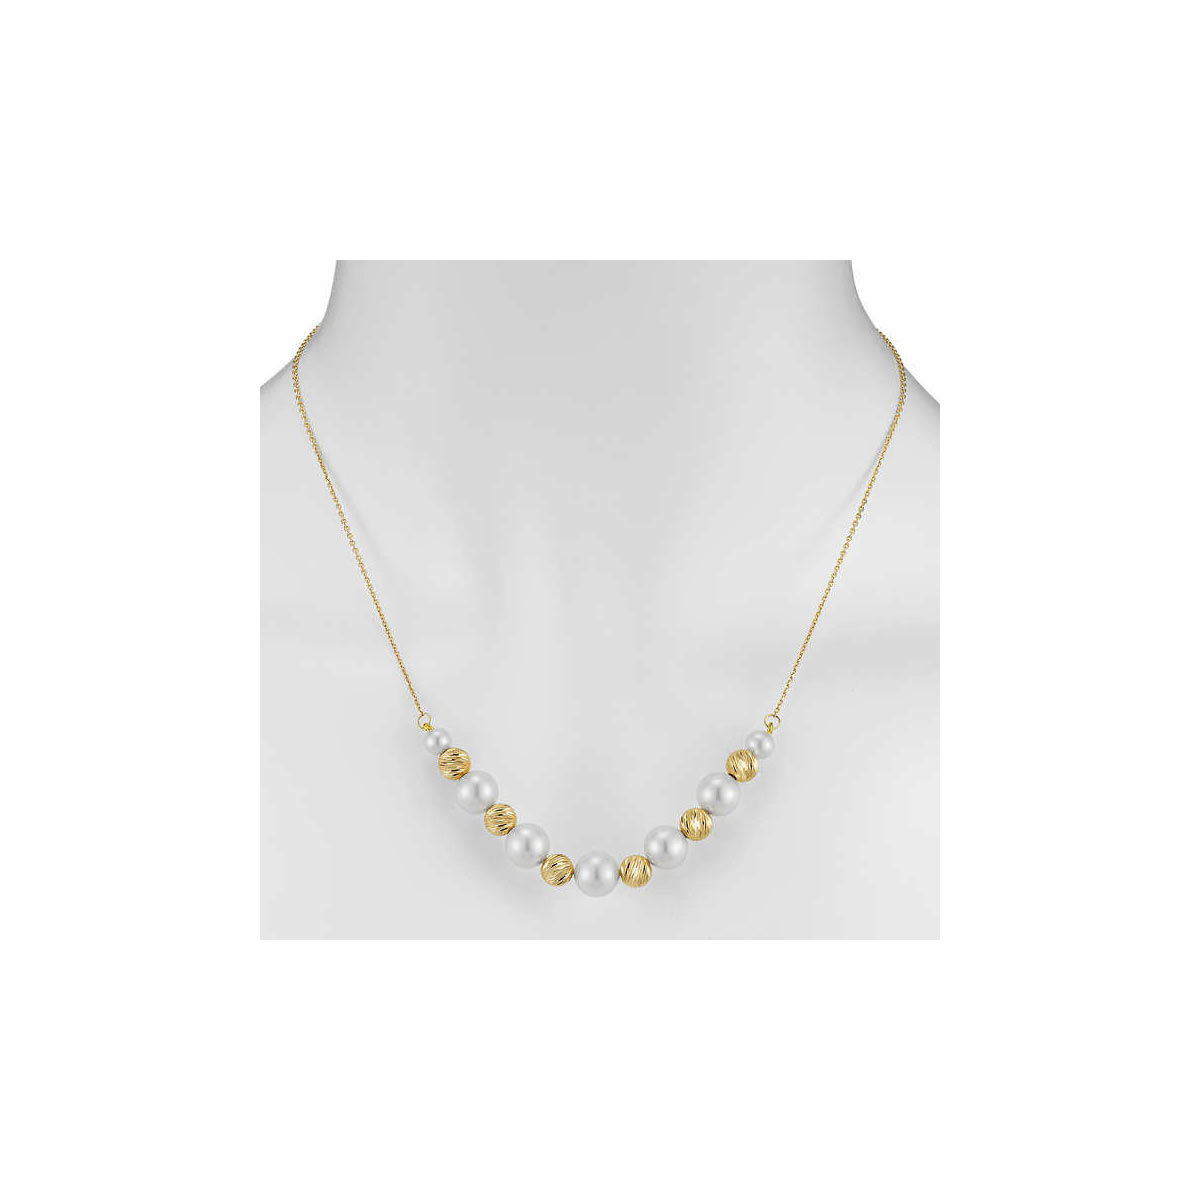 8-8.5mm Cultured Freshwater White Pearl Necklace, 18ct Yellow Gold